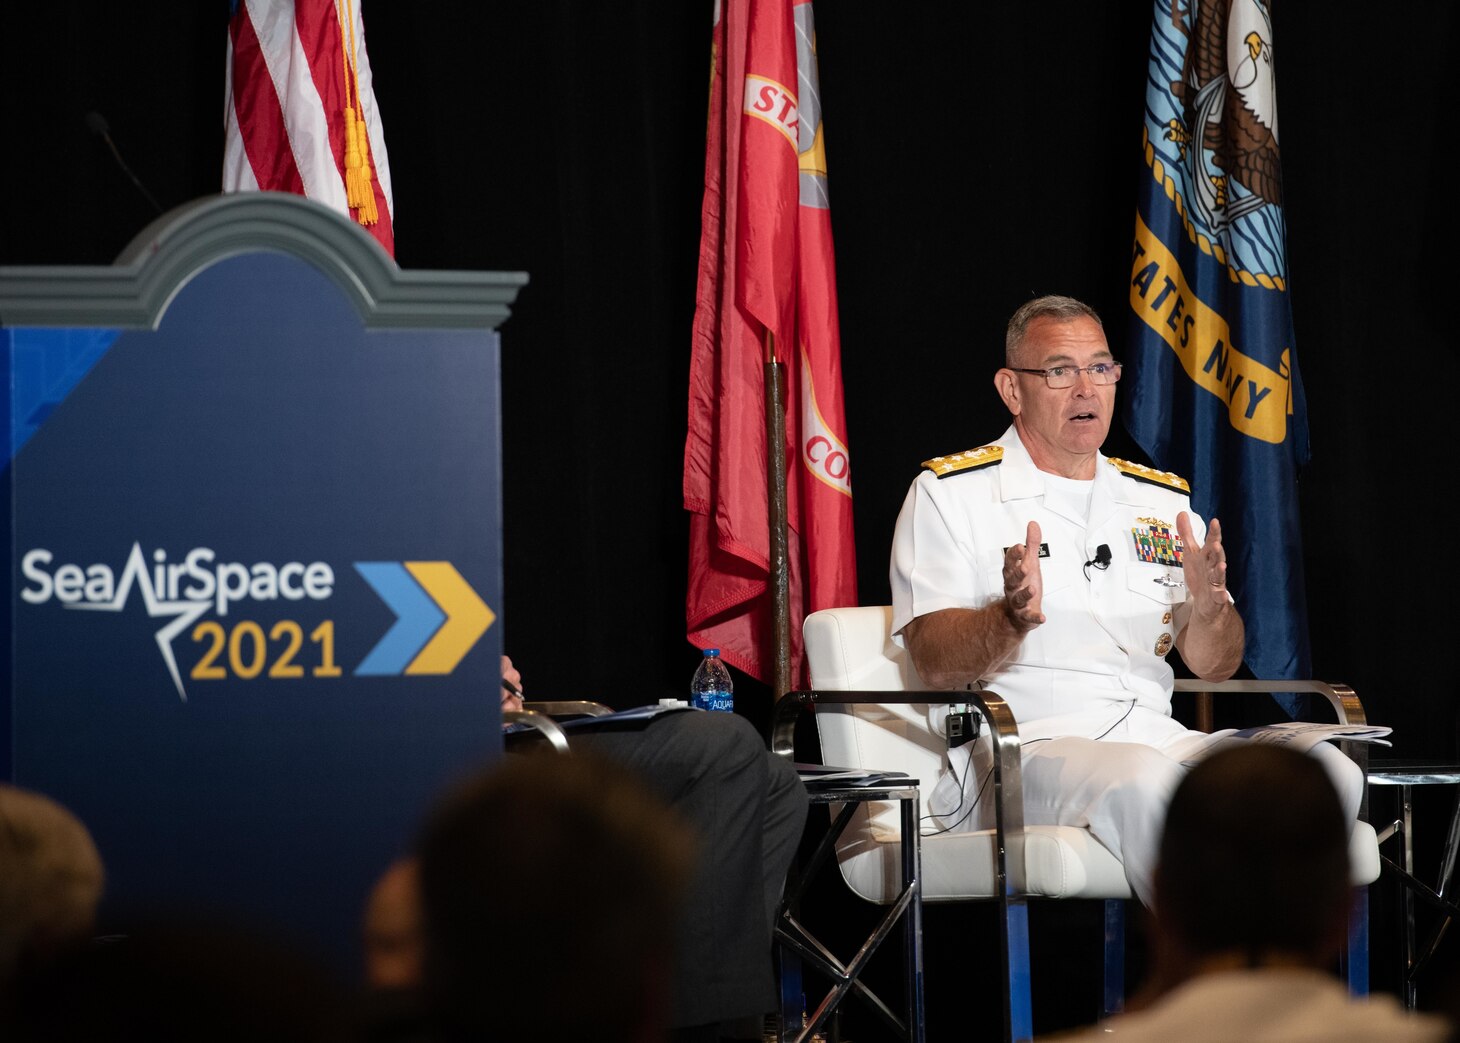 Vice Adm. Jeffrey Trussler, Deputy Chief of Naval Operations for Information Warfare, speaks in the “Cyber: Today’s fight, Tomorrow’s Capabilities” panel at the Sea-Air-Space 2021 exposition.